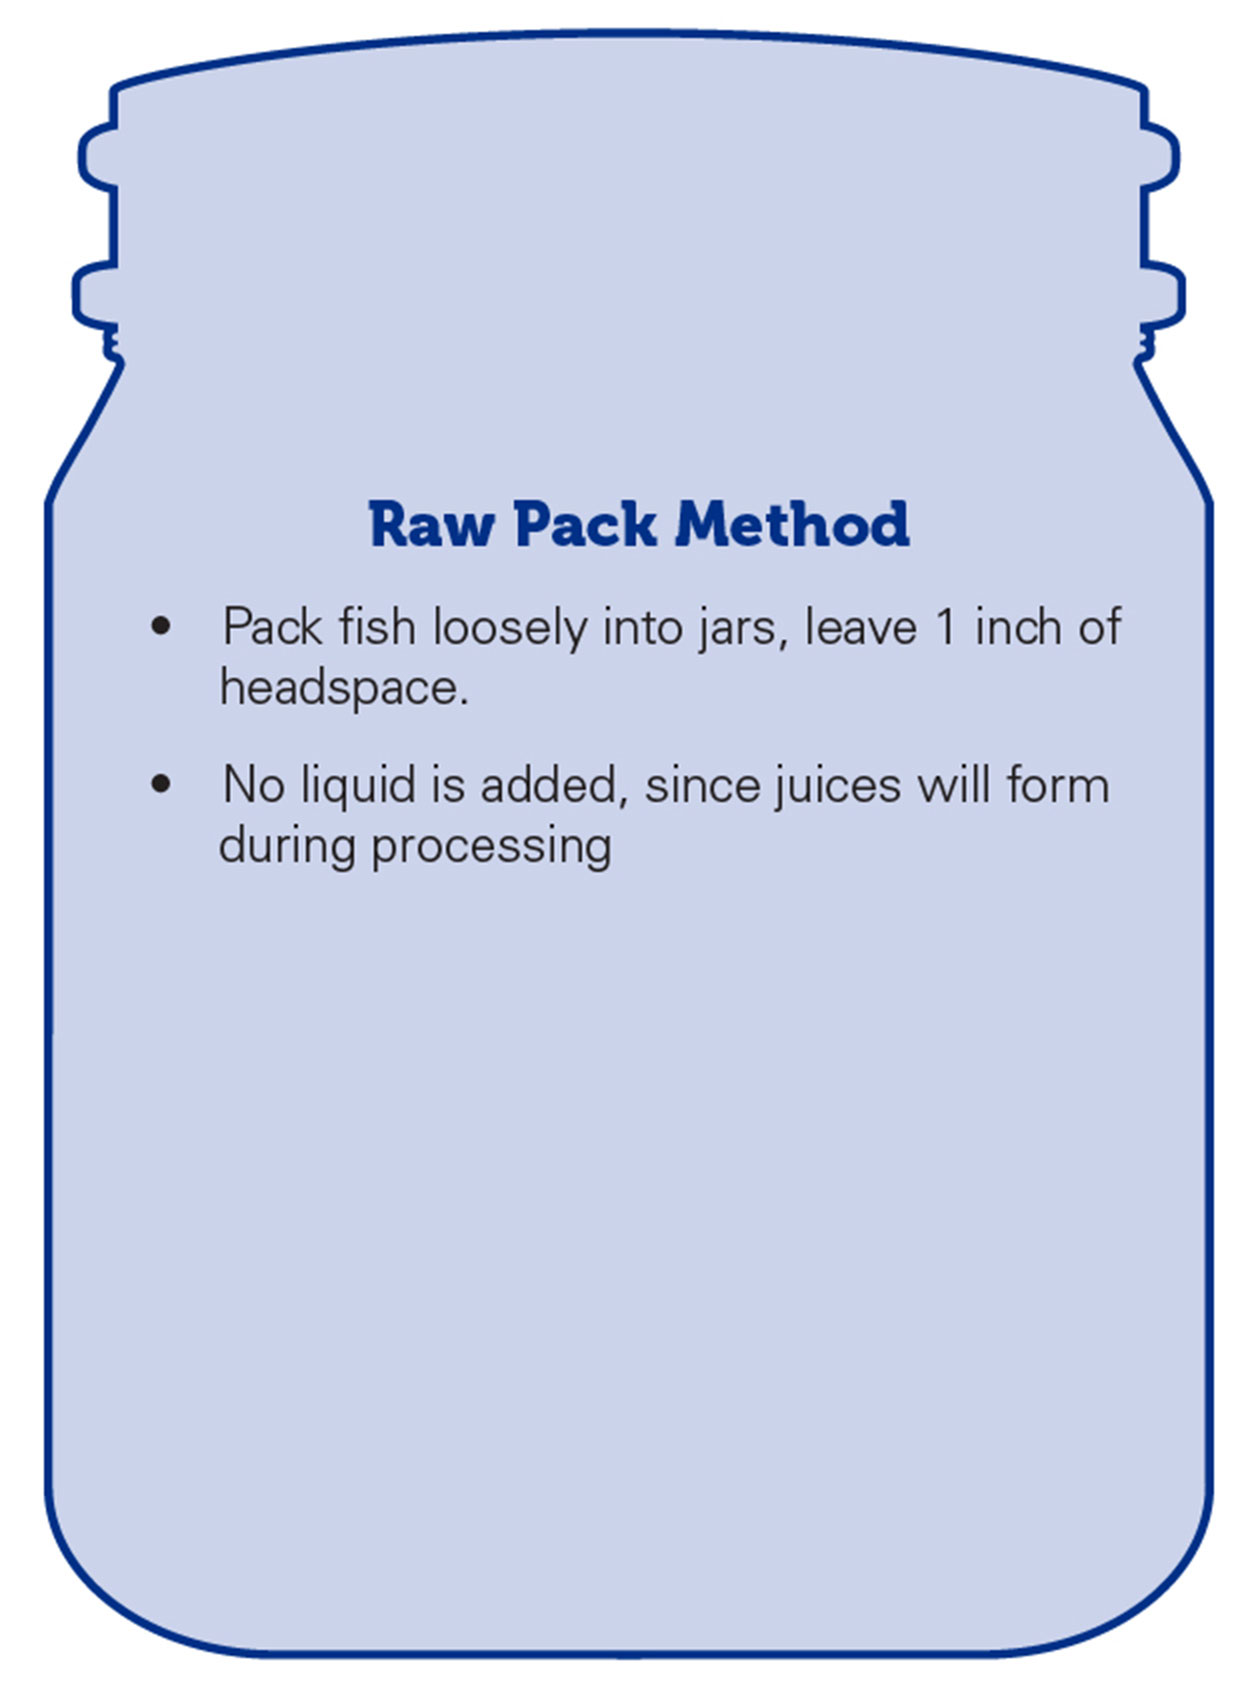 Outline of a canning jar with text explaining the raw pack method. To raw pack fish, loosely pack fish into jars, leave 1 inch of headspace. No liquid is added, since juices will form during processing.